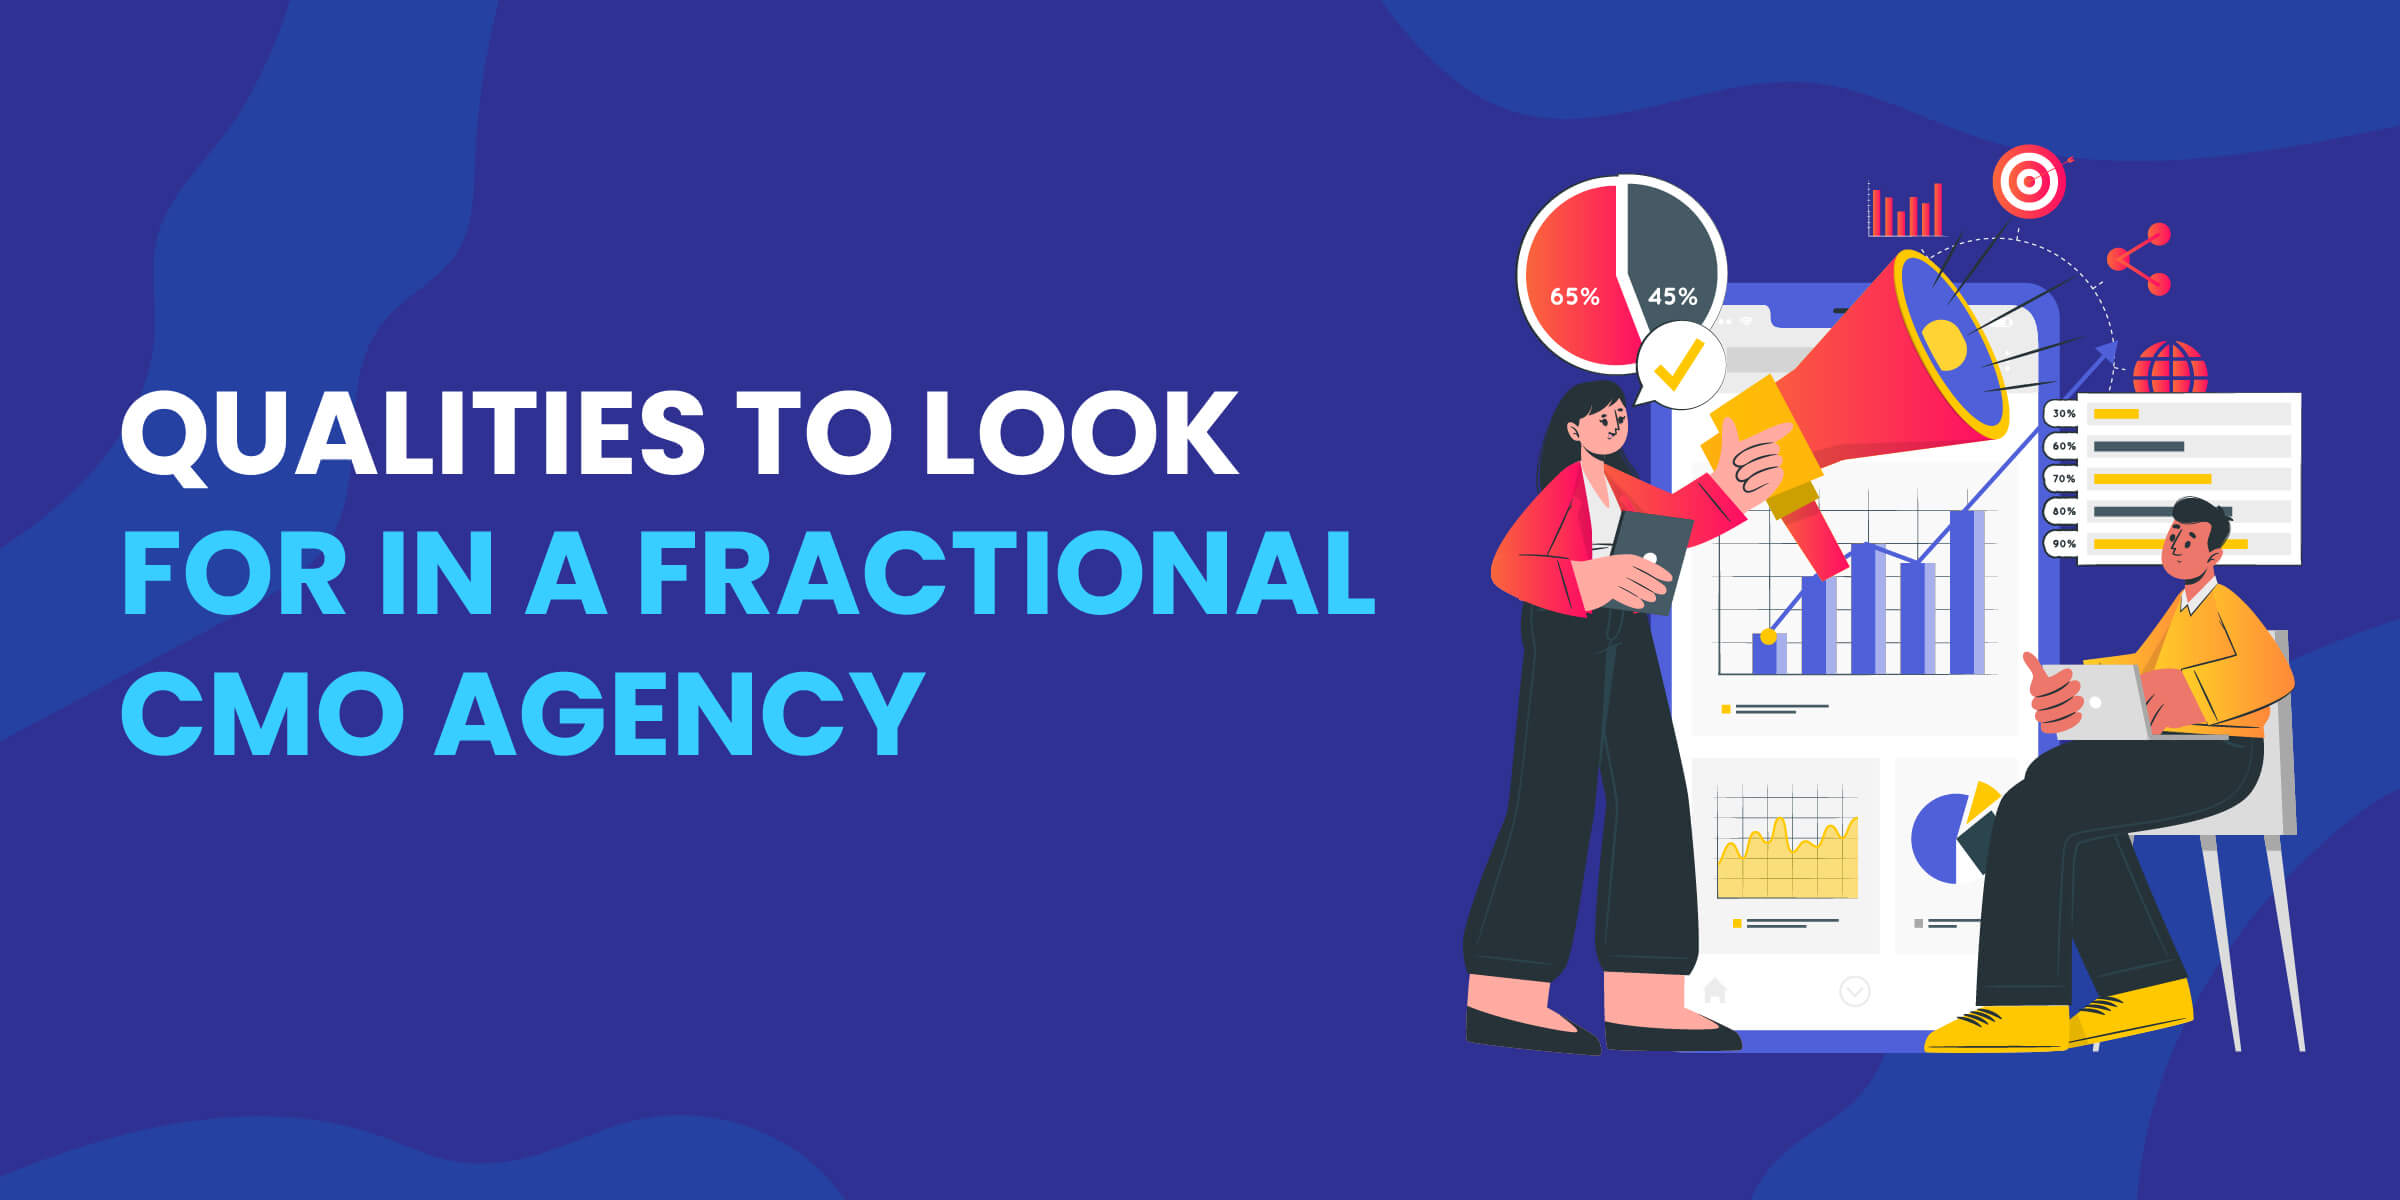 Qualities to Look for in Fractional CMO Agency